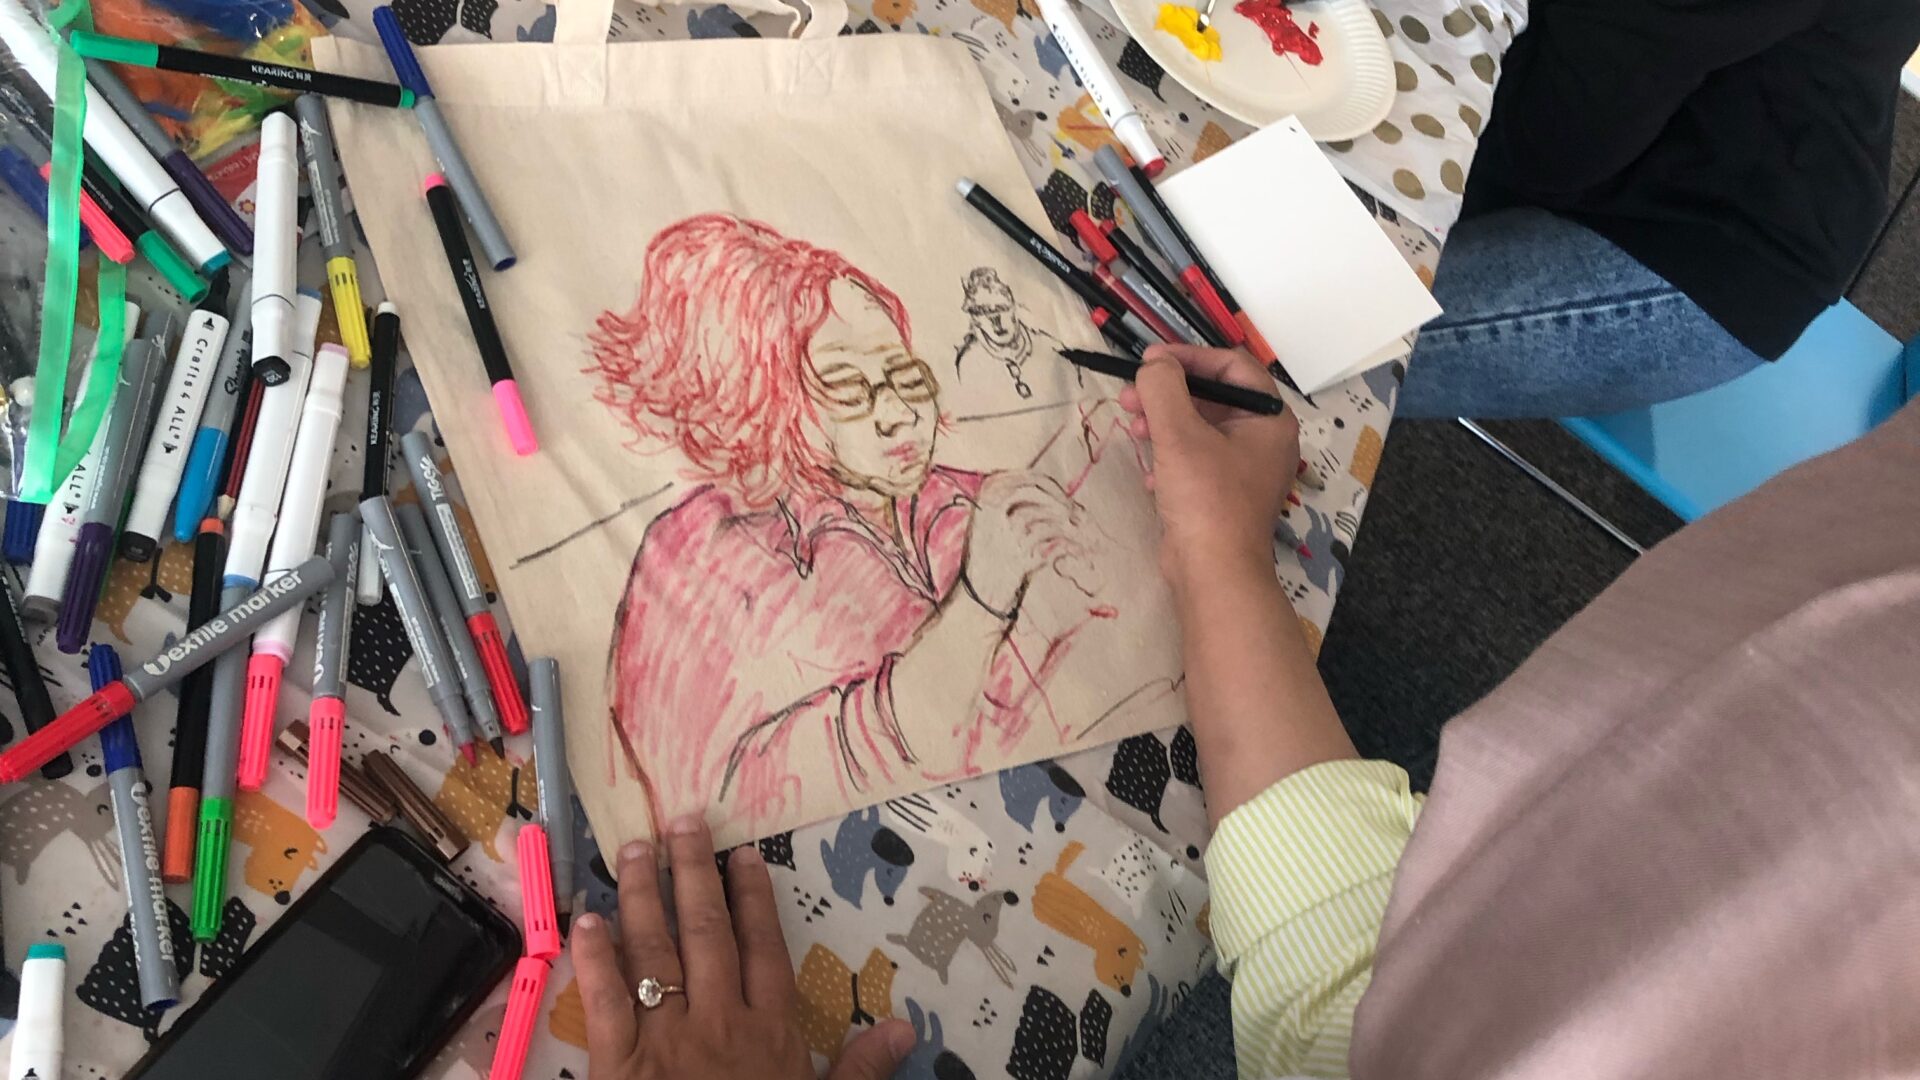 Woman drawing a portrait of another woman.